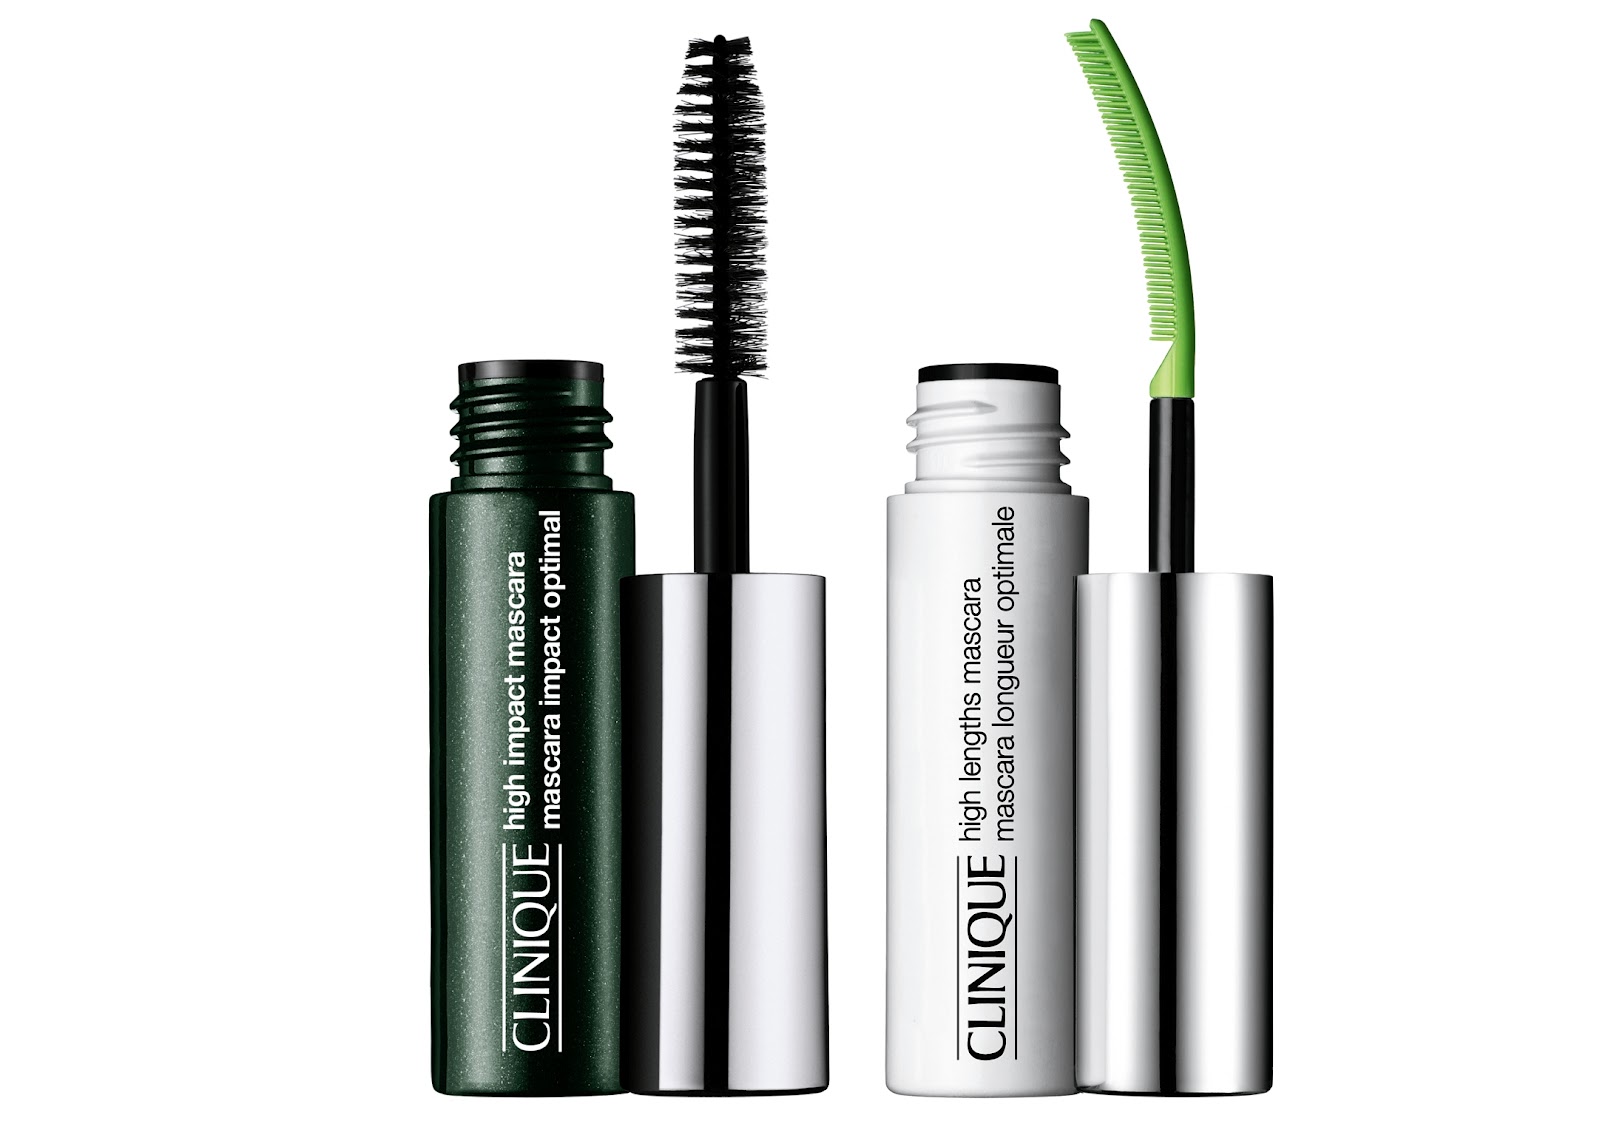 6 Day Clinique Workout Mascara for Women